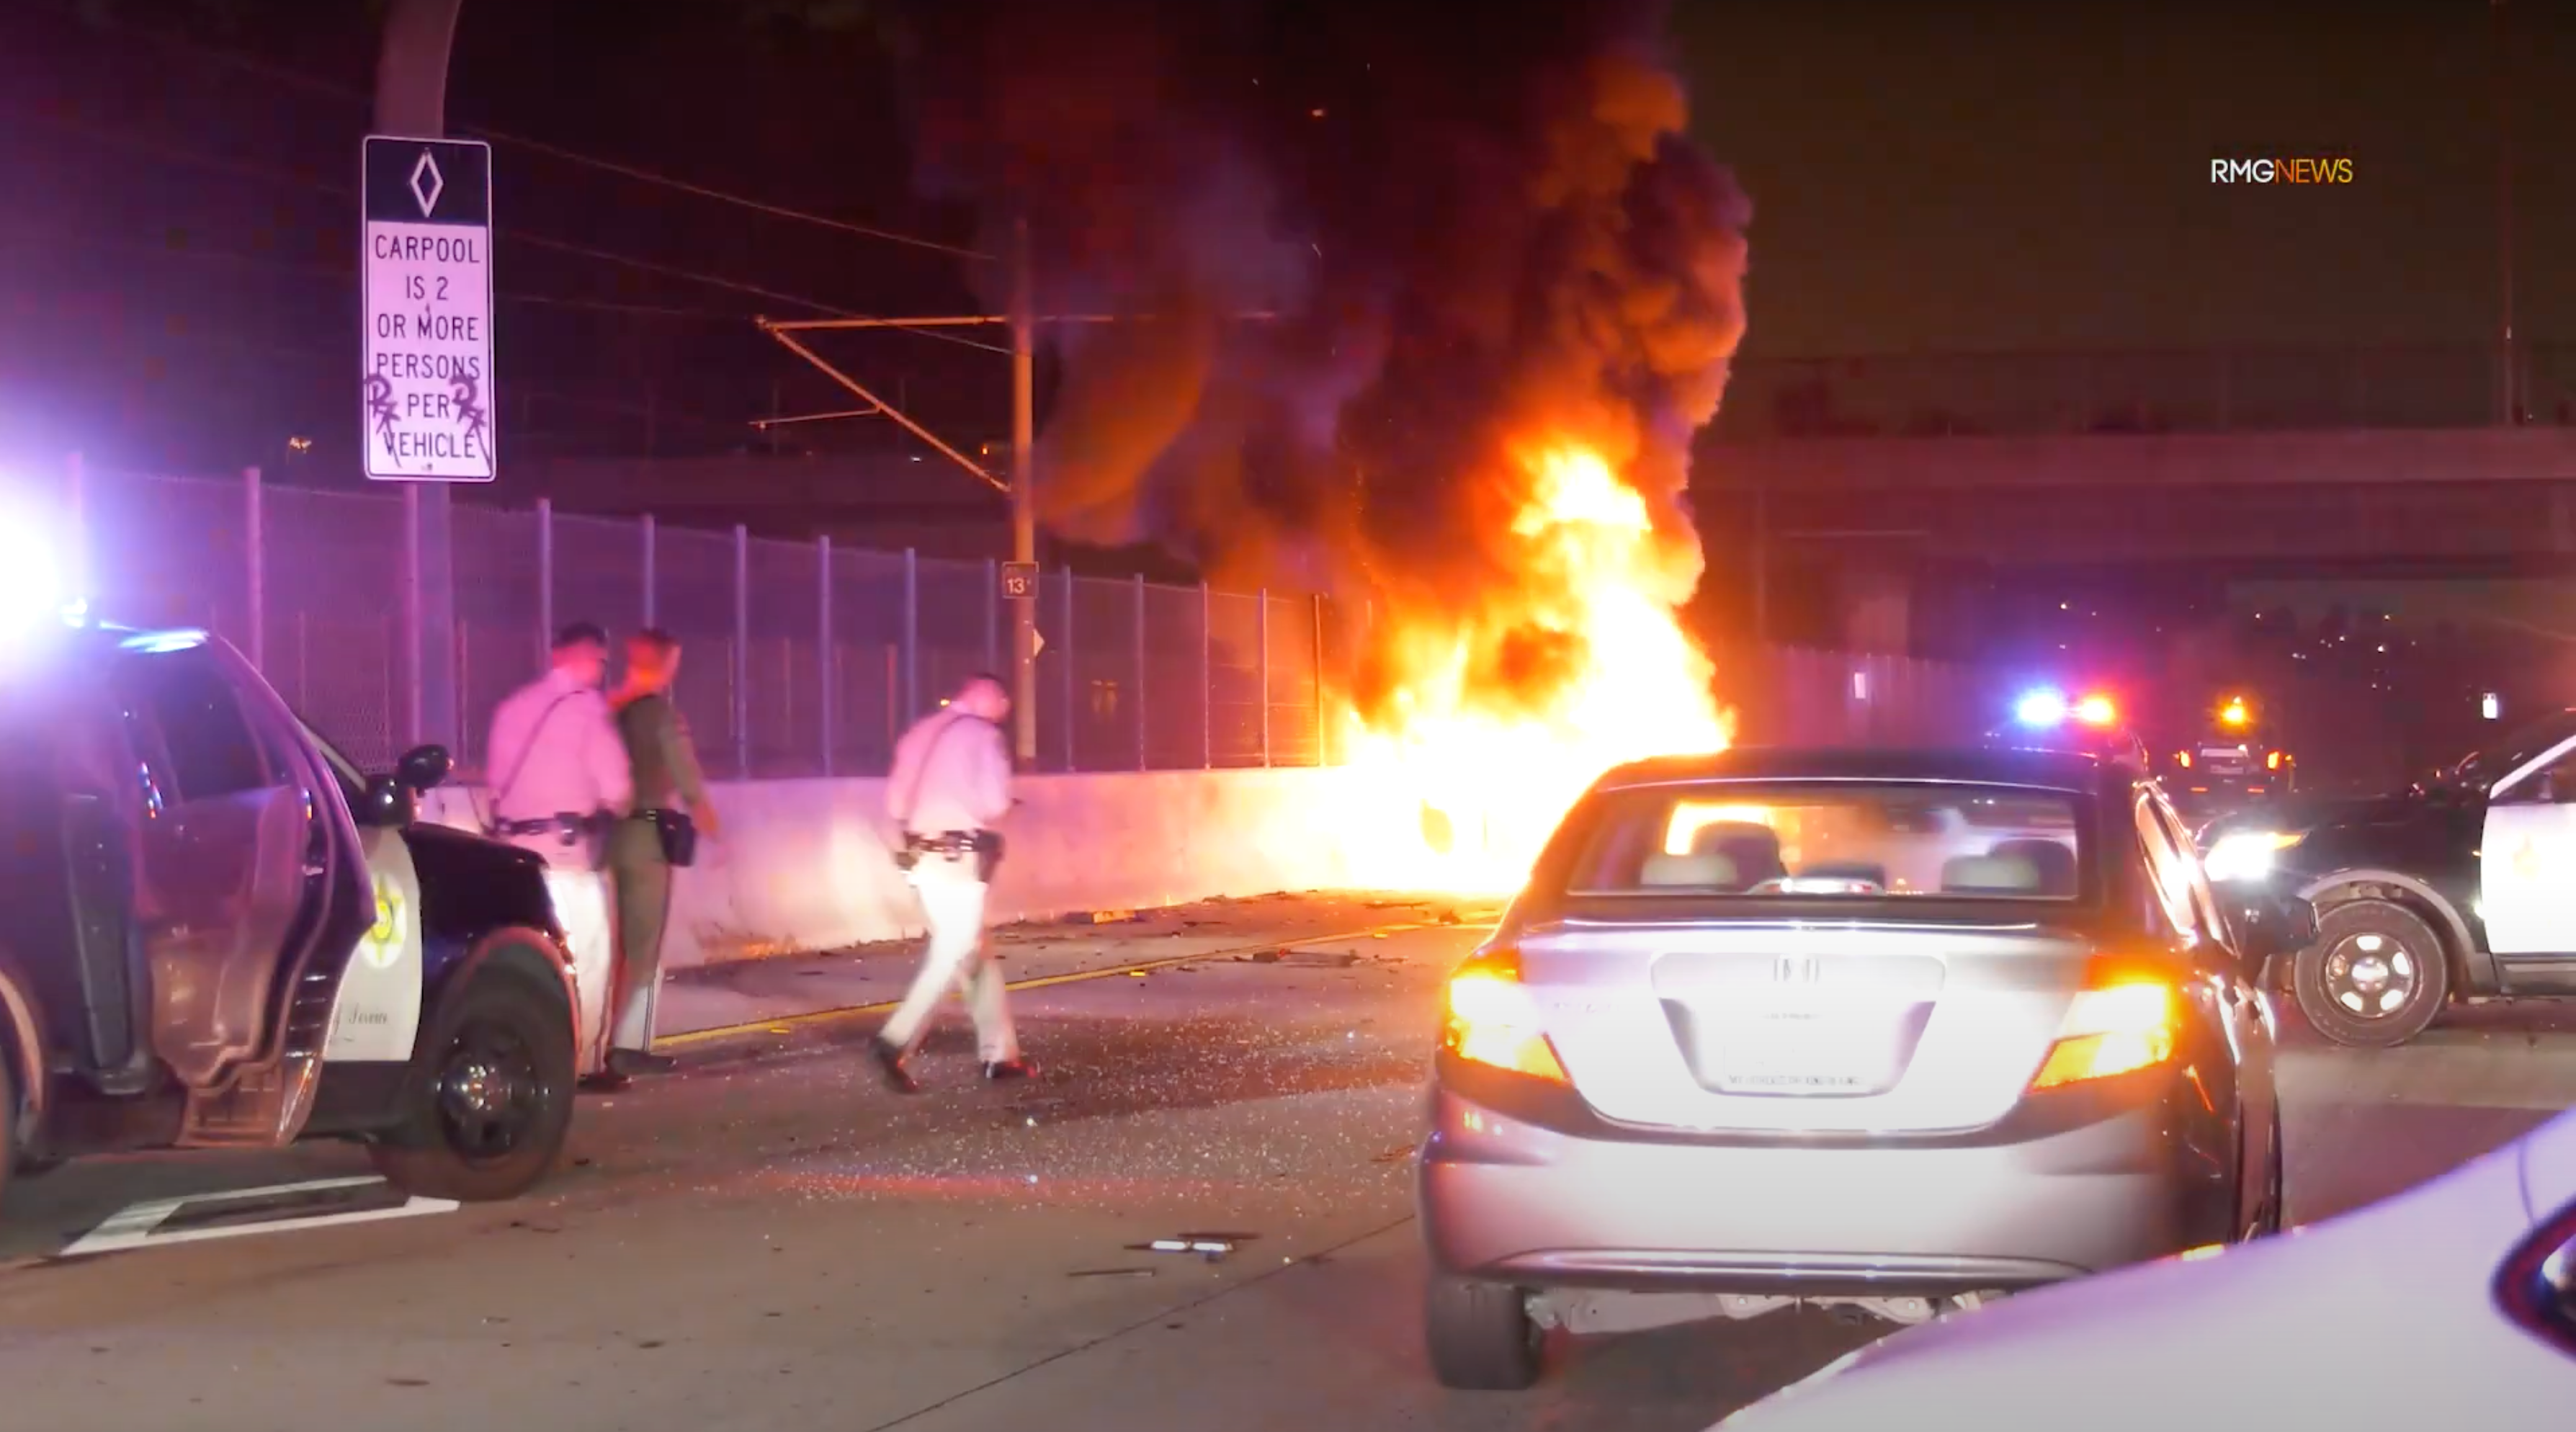 A California Highway Patrol vehicle caught fire after an out-of-control driver crashed into it, witnesses say